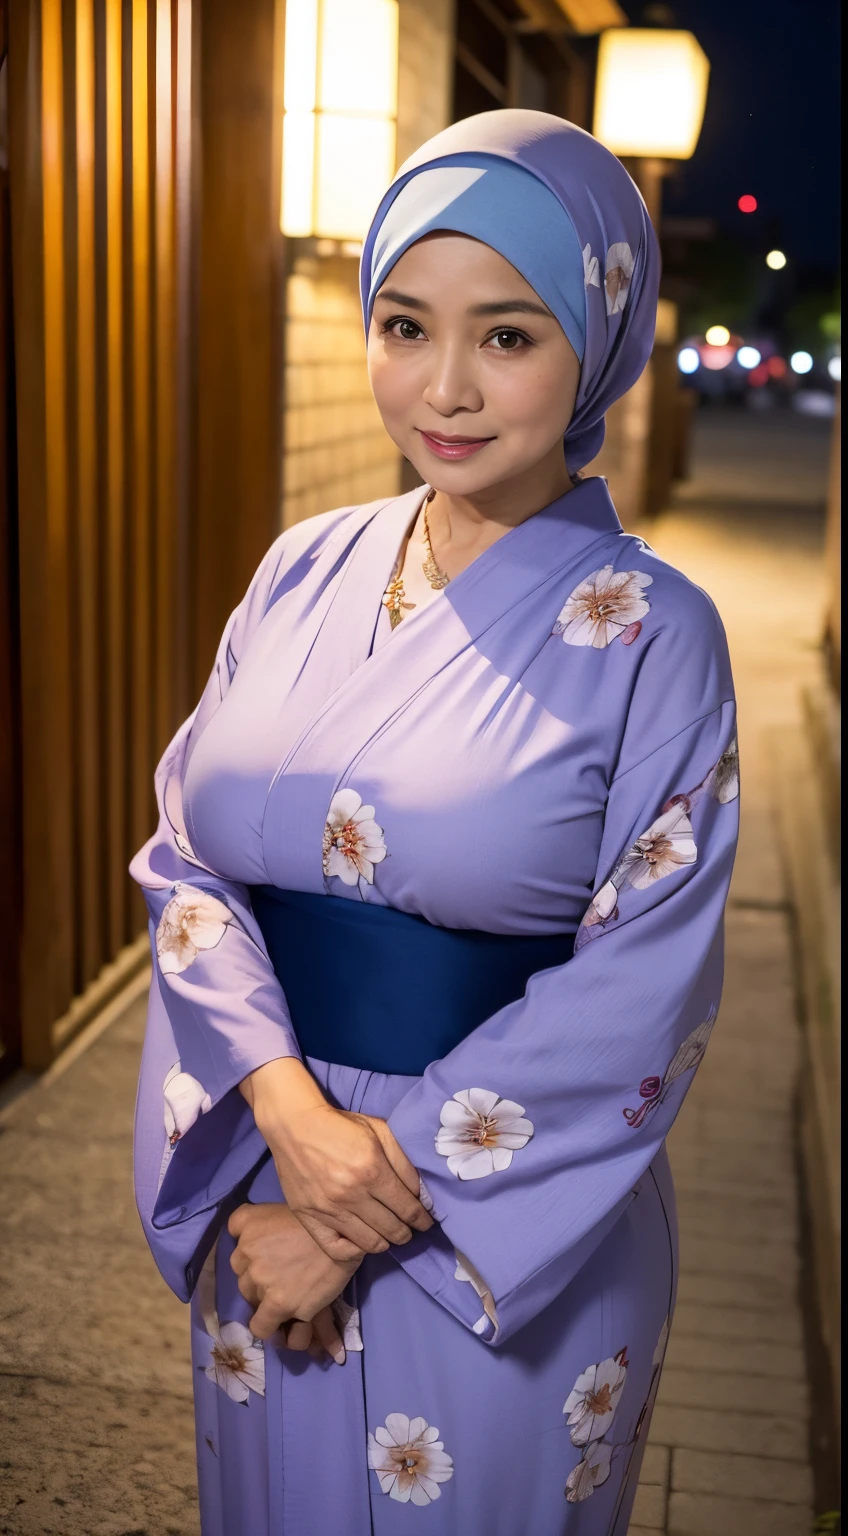 58 Years old, Indonesian mature woman, wearing Wide Hijab, perfect , natural Gigantic breast : 96.9, gorgeous eyes, Soft smile, wear a Yukata, No Wearing Bra, necklace, Breast about to burst Out, Nightime walk, Lewd Situation, Light Colour.